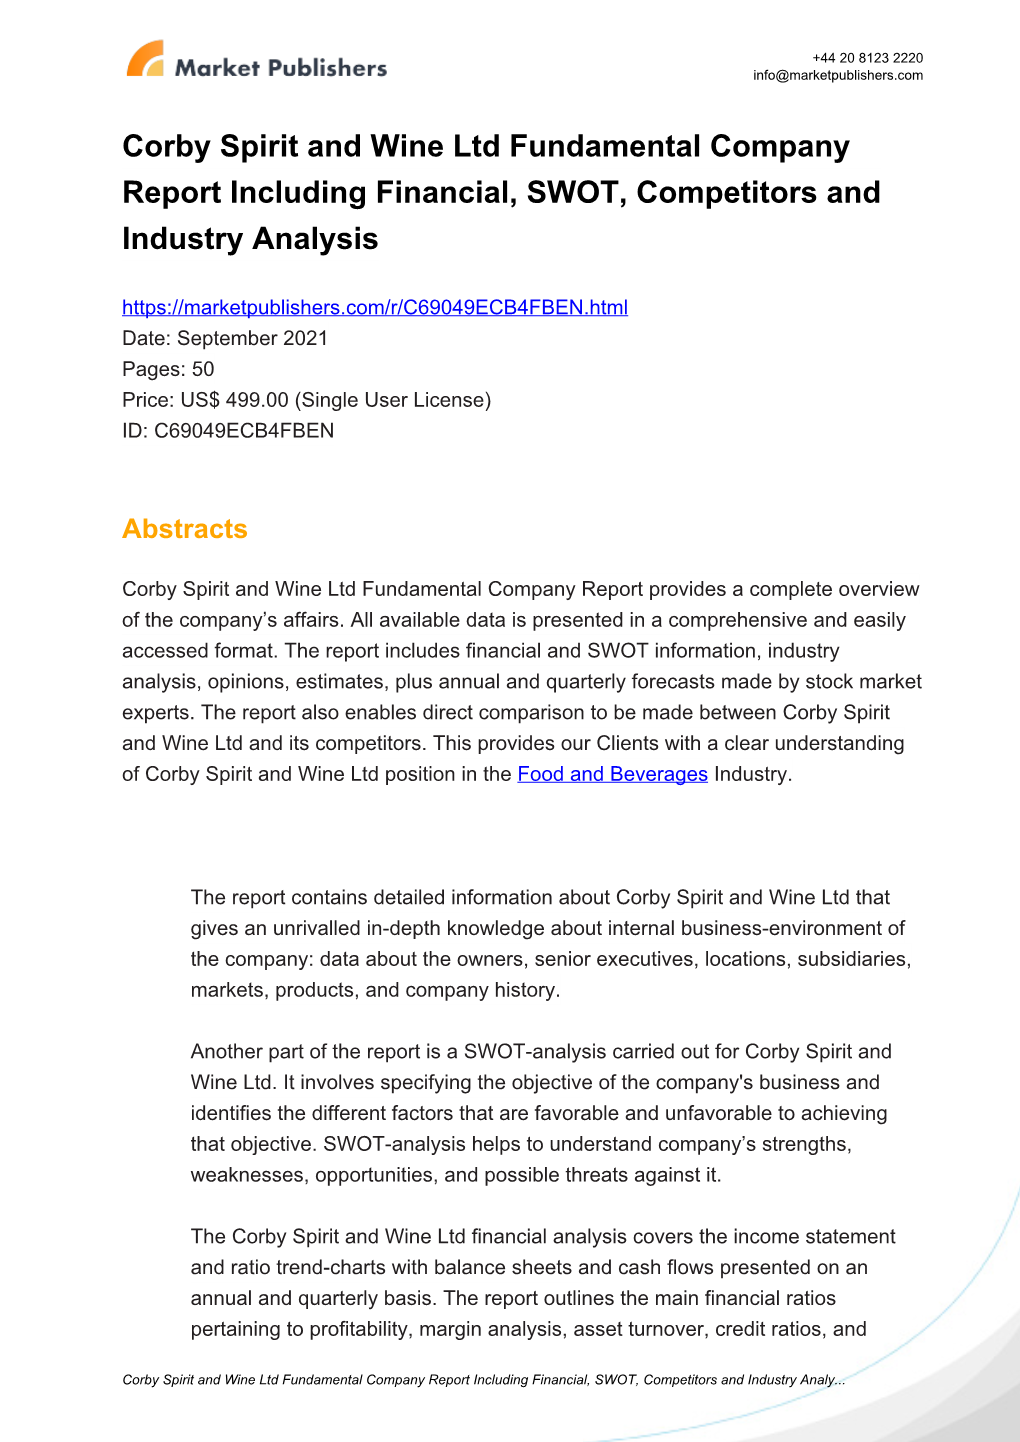 Corby Spirit and Wine Ltd Fundamental Company Report Including Financial, SWOT, Competitors and Industry Analysis